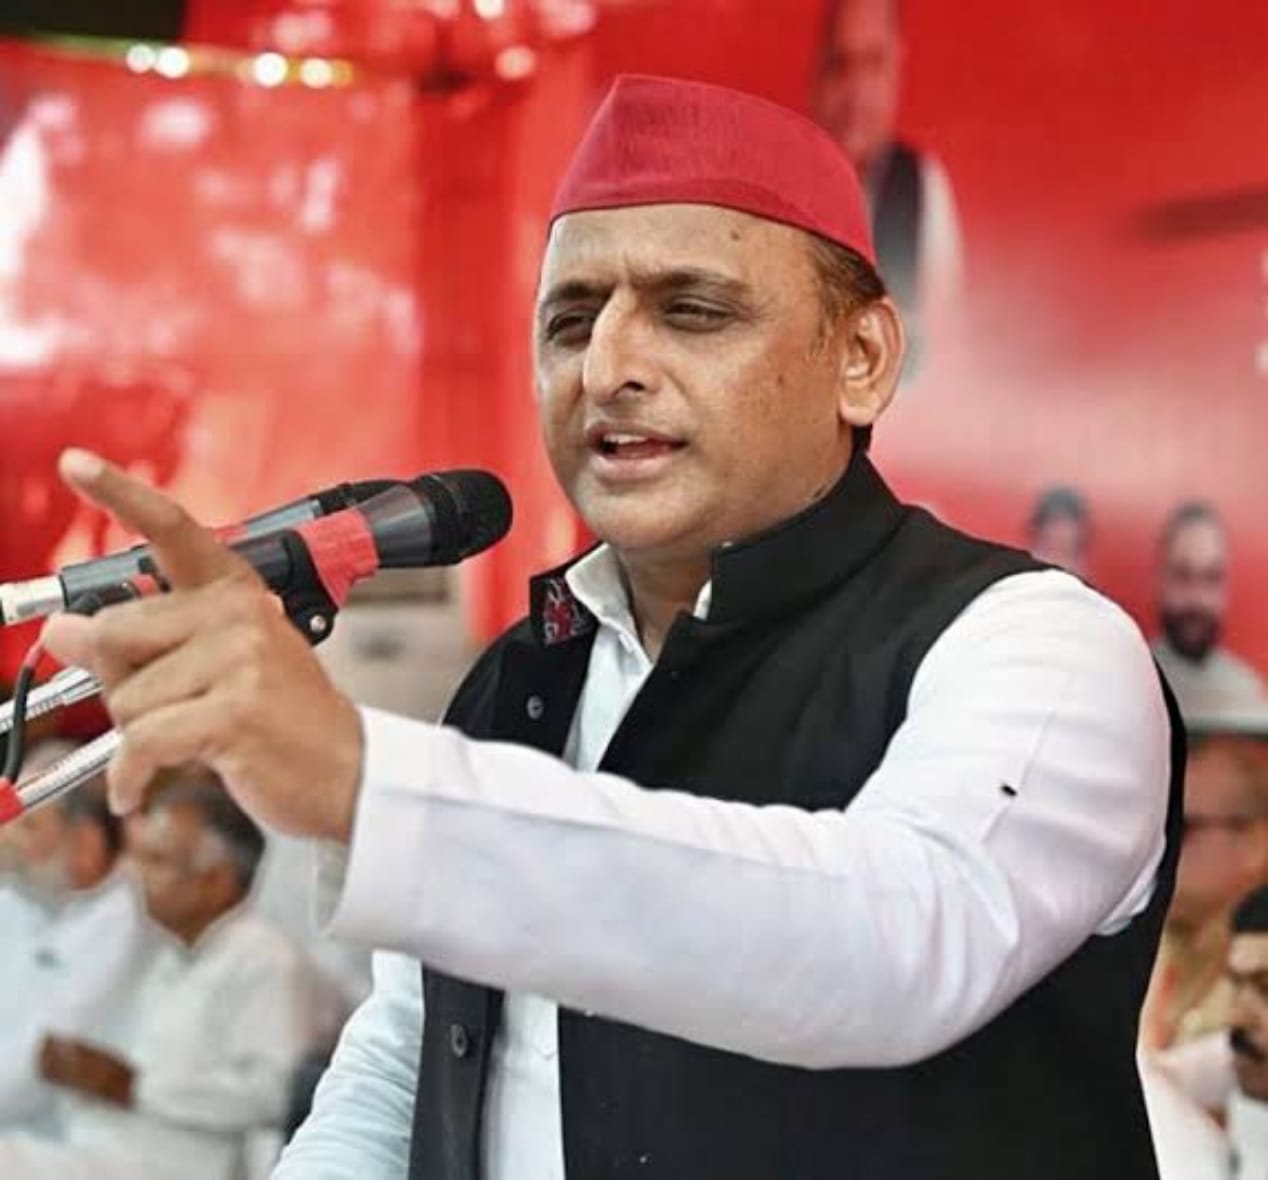 Akhilesh Yadav says, "There is a fear of failure in the speeches of BJP leaders."